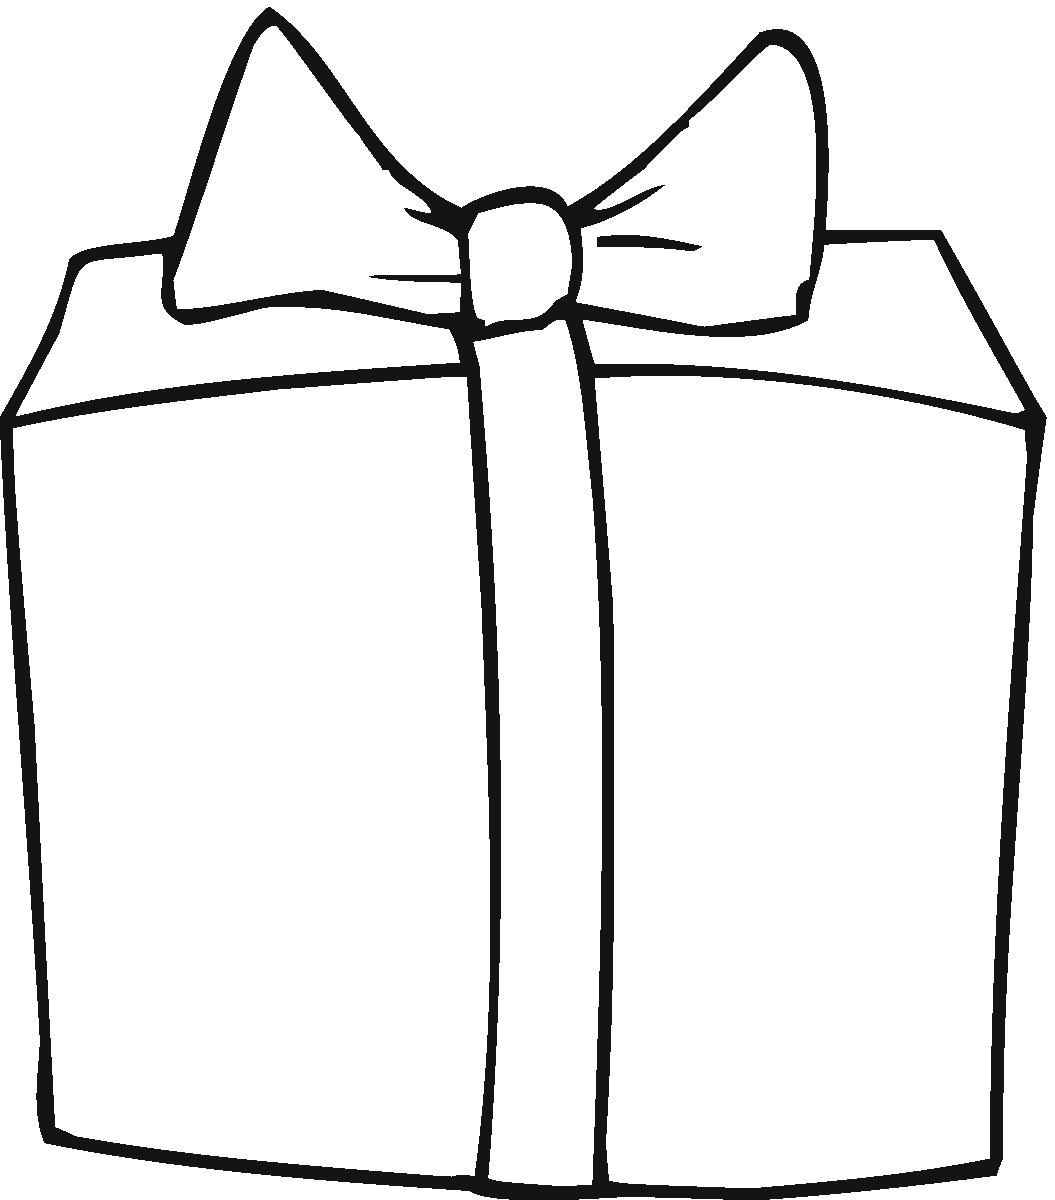 Black And White Outline Design Of A Mouse Pulling A Christmas Gift On